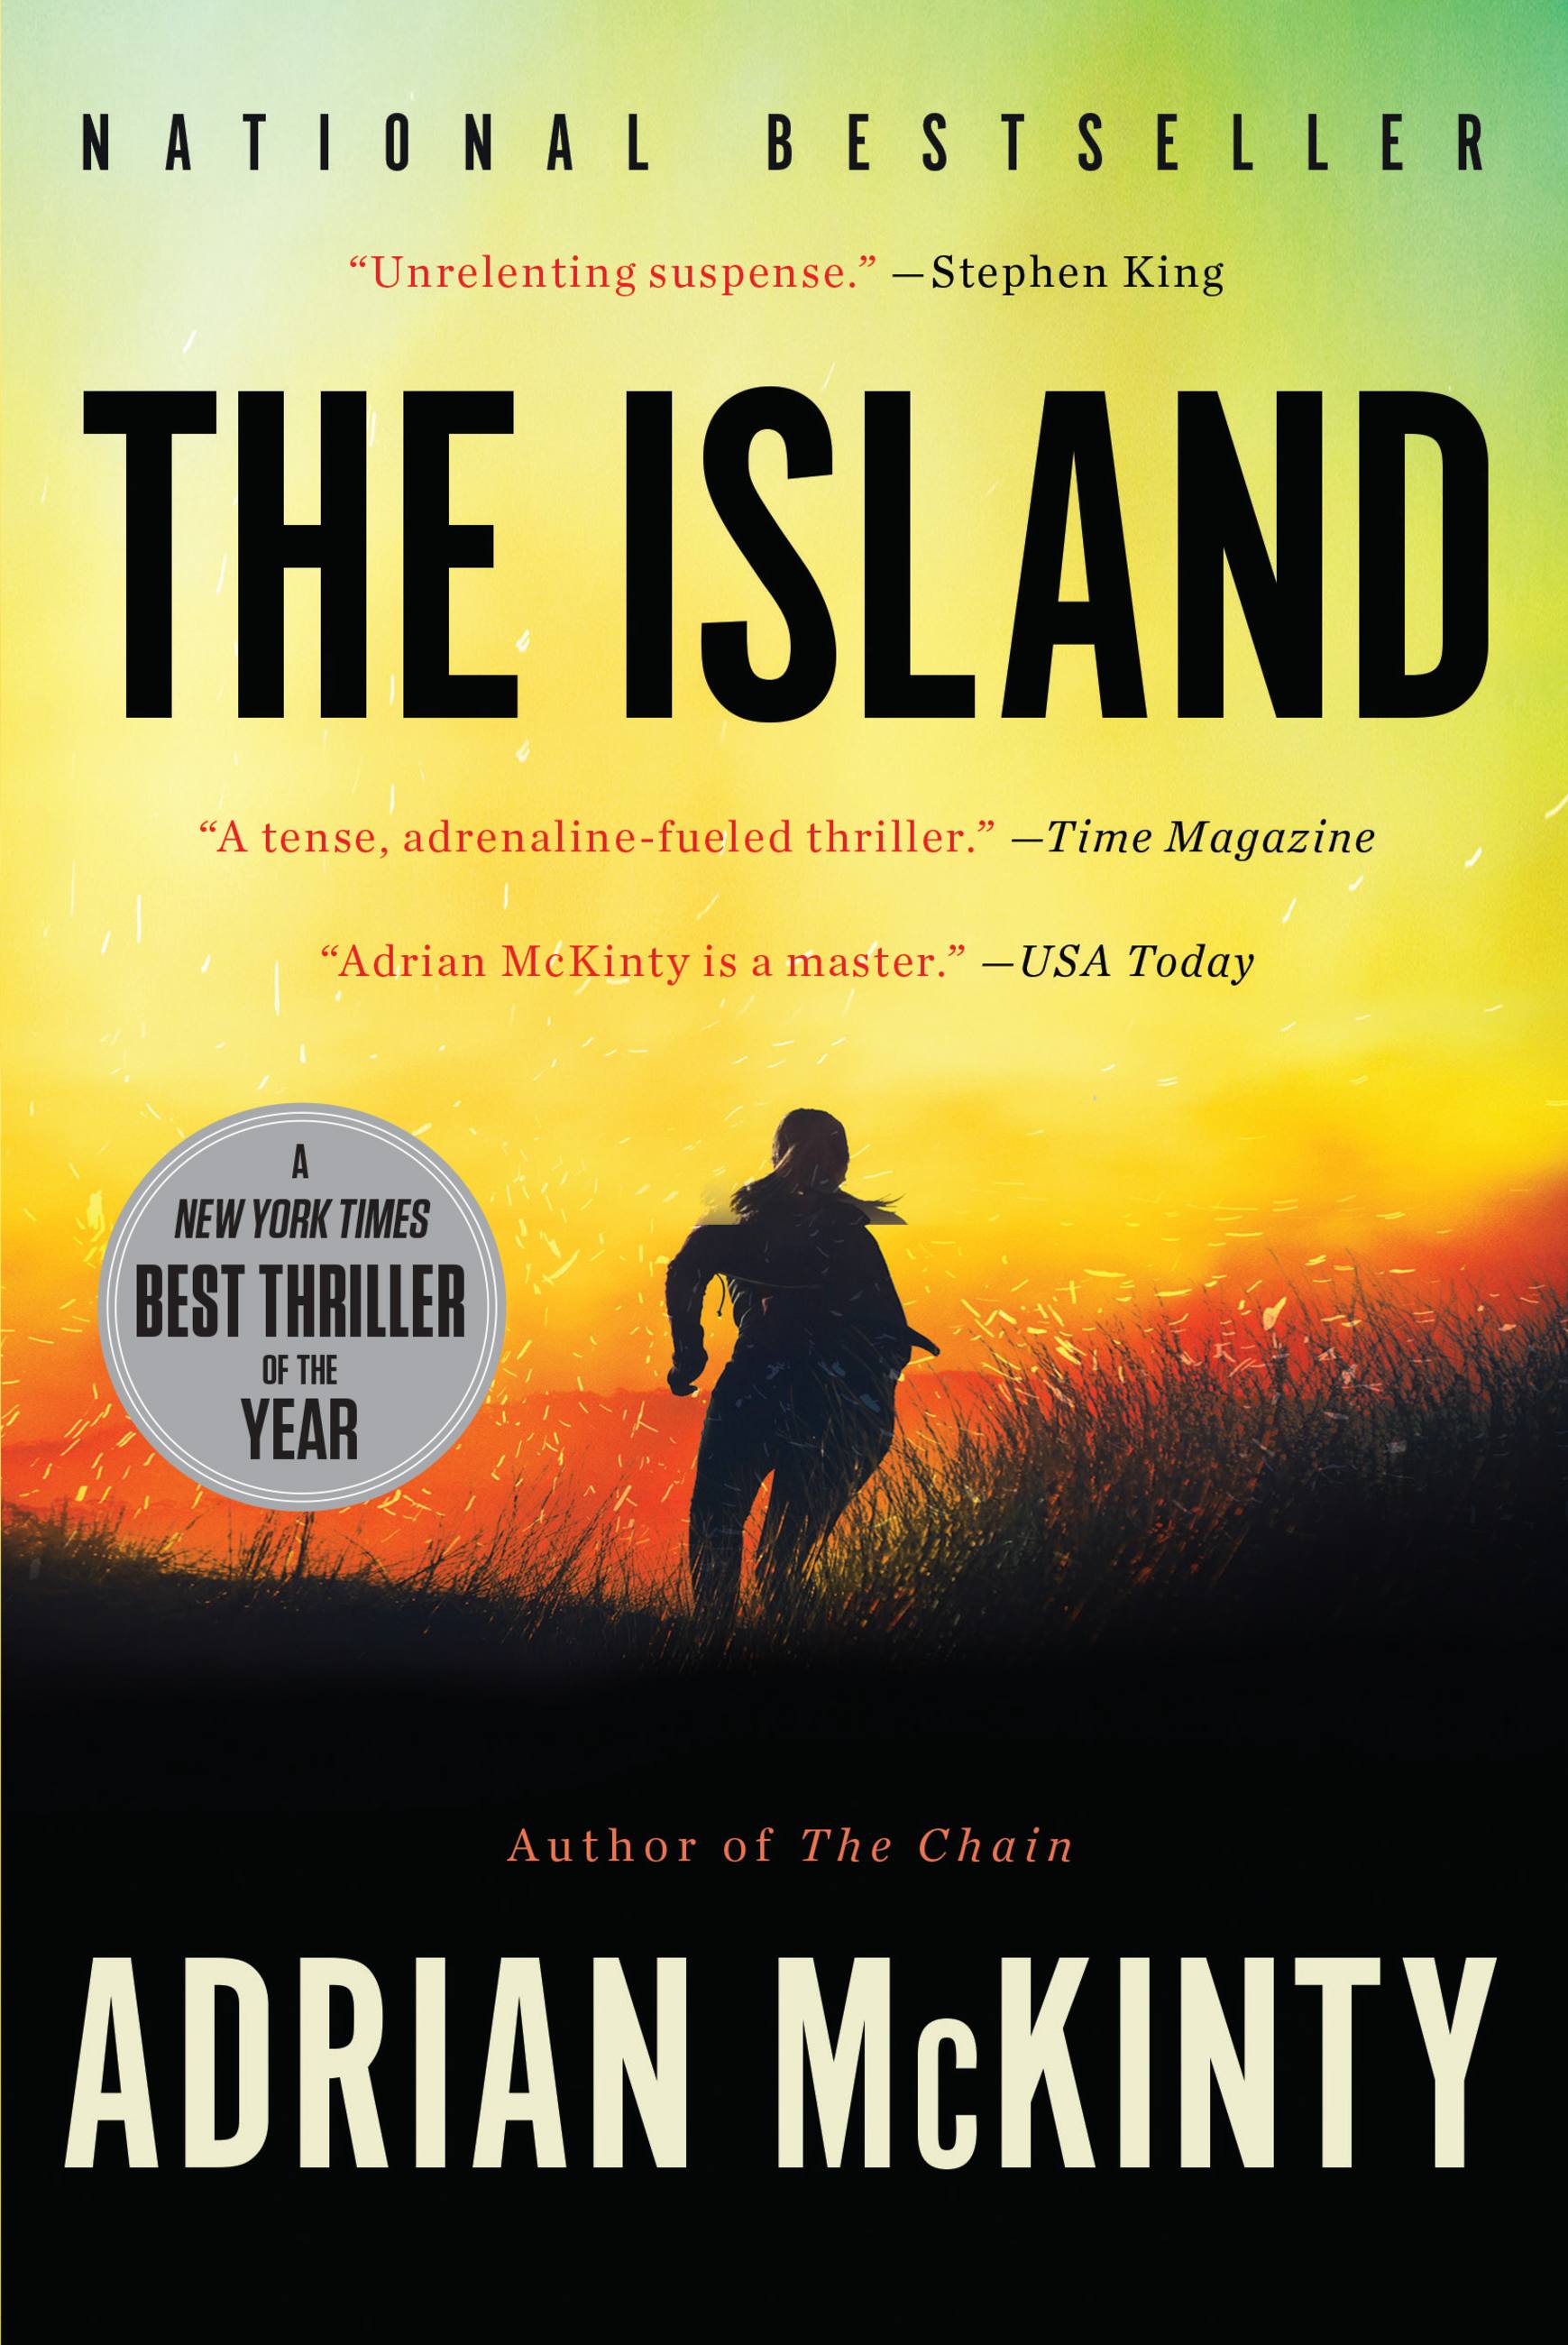 The Island by Adrian McKinty | Hachette Book Group